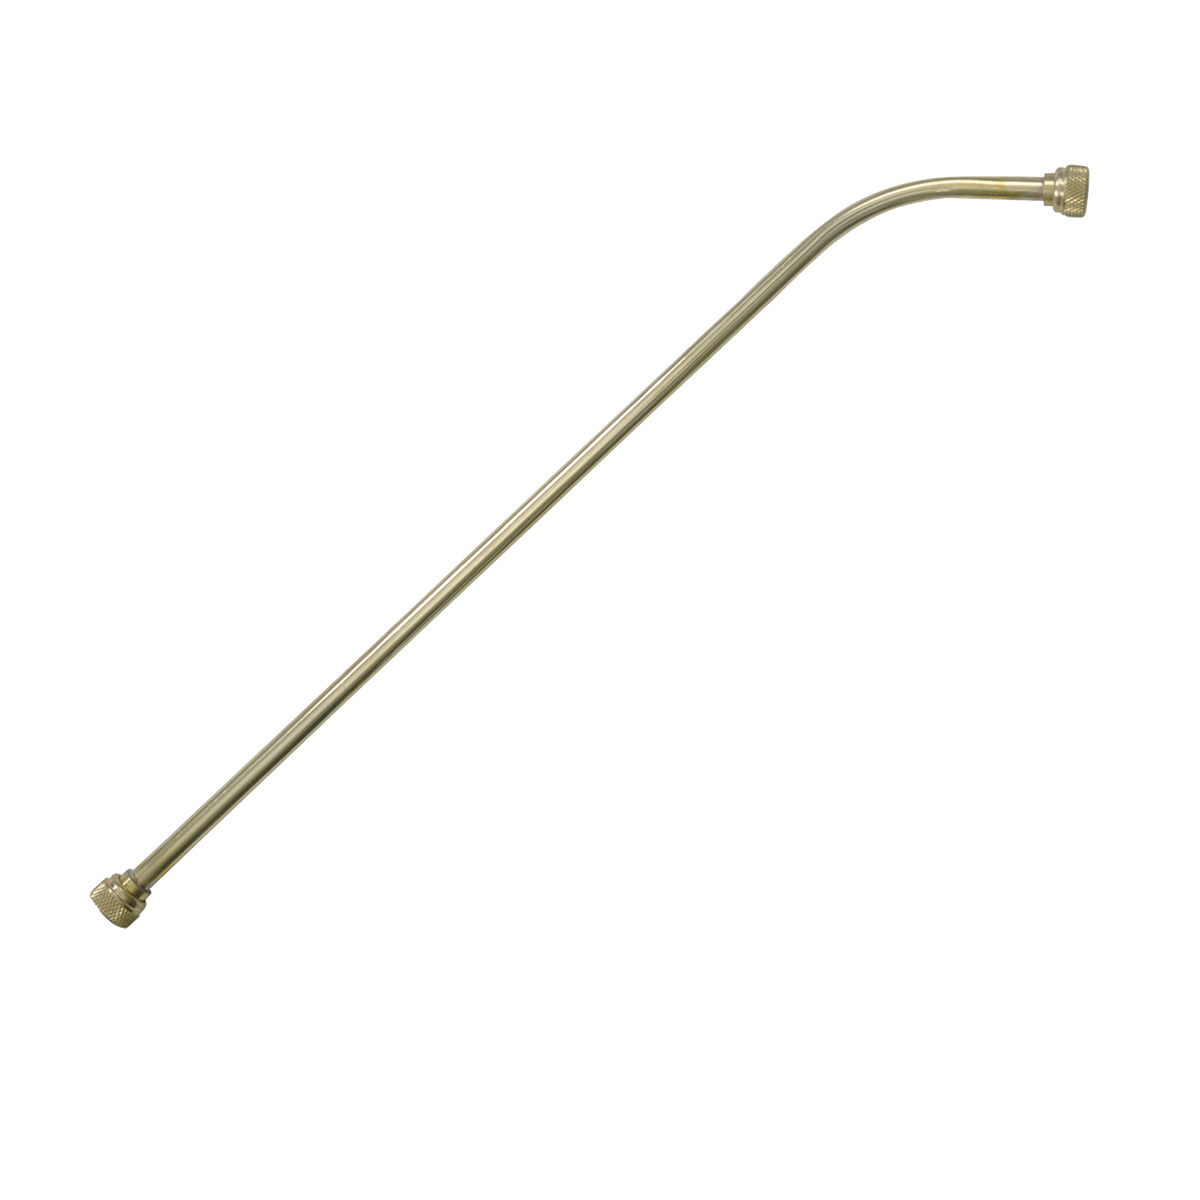 CHAPIN 6-7742 Extension Wand, Replacement, Brass, For: 22790XP, 22090XP and 1352 Compression Sprayer